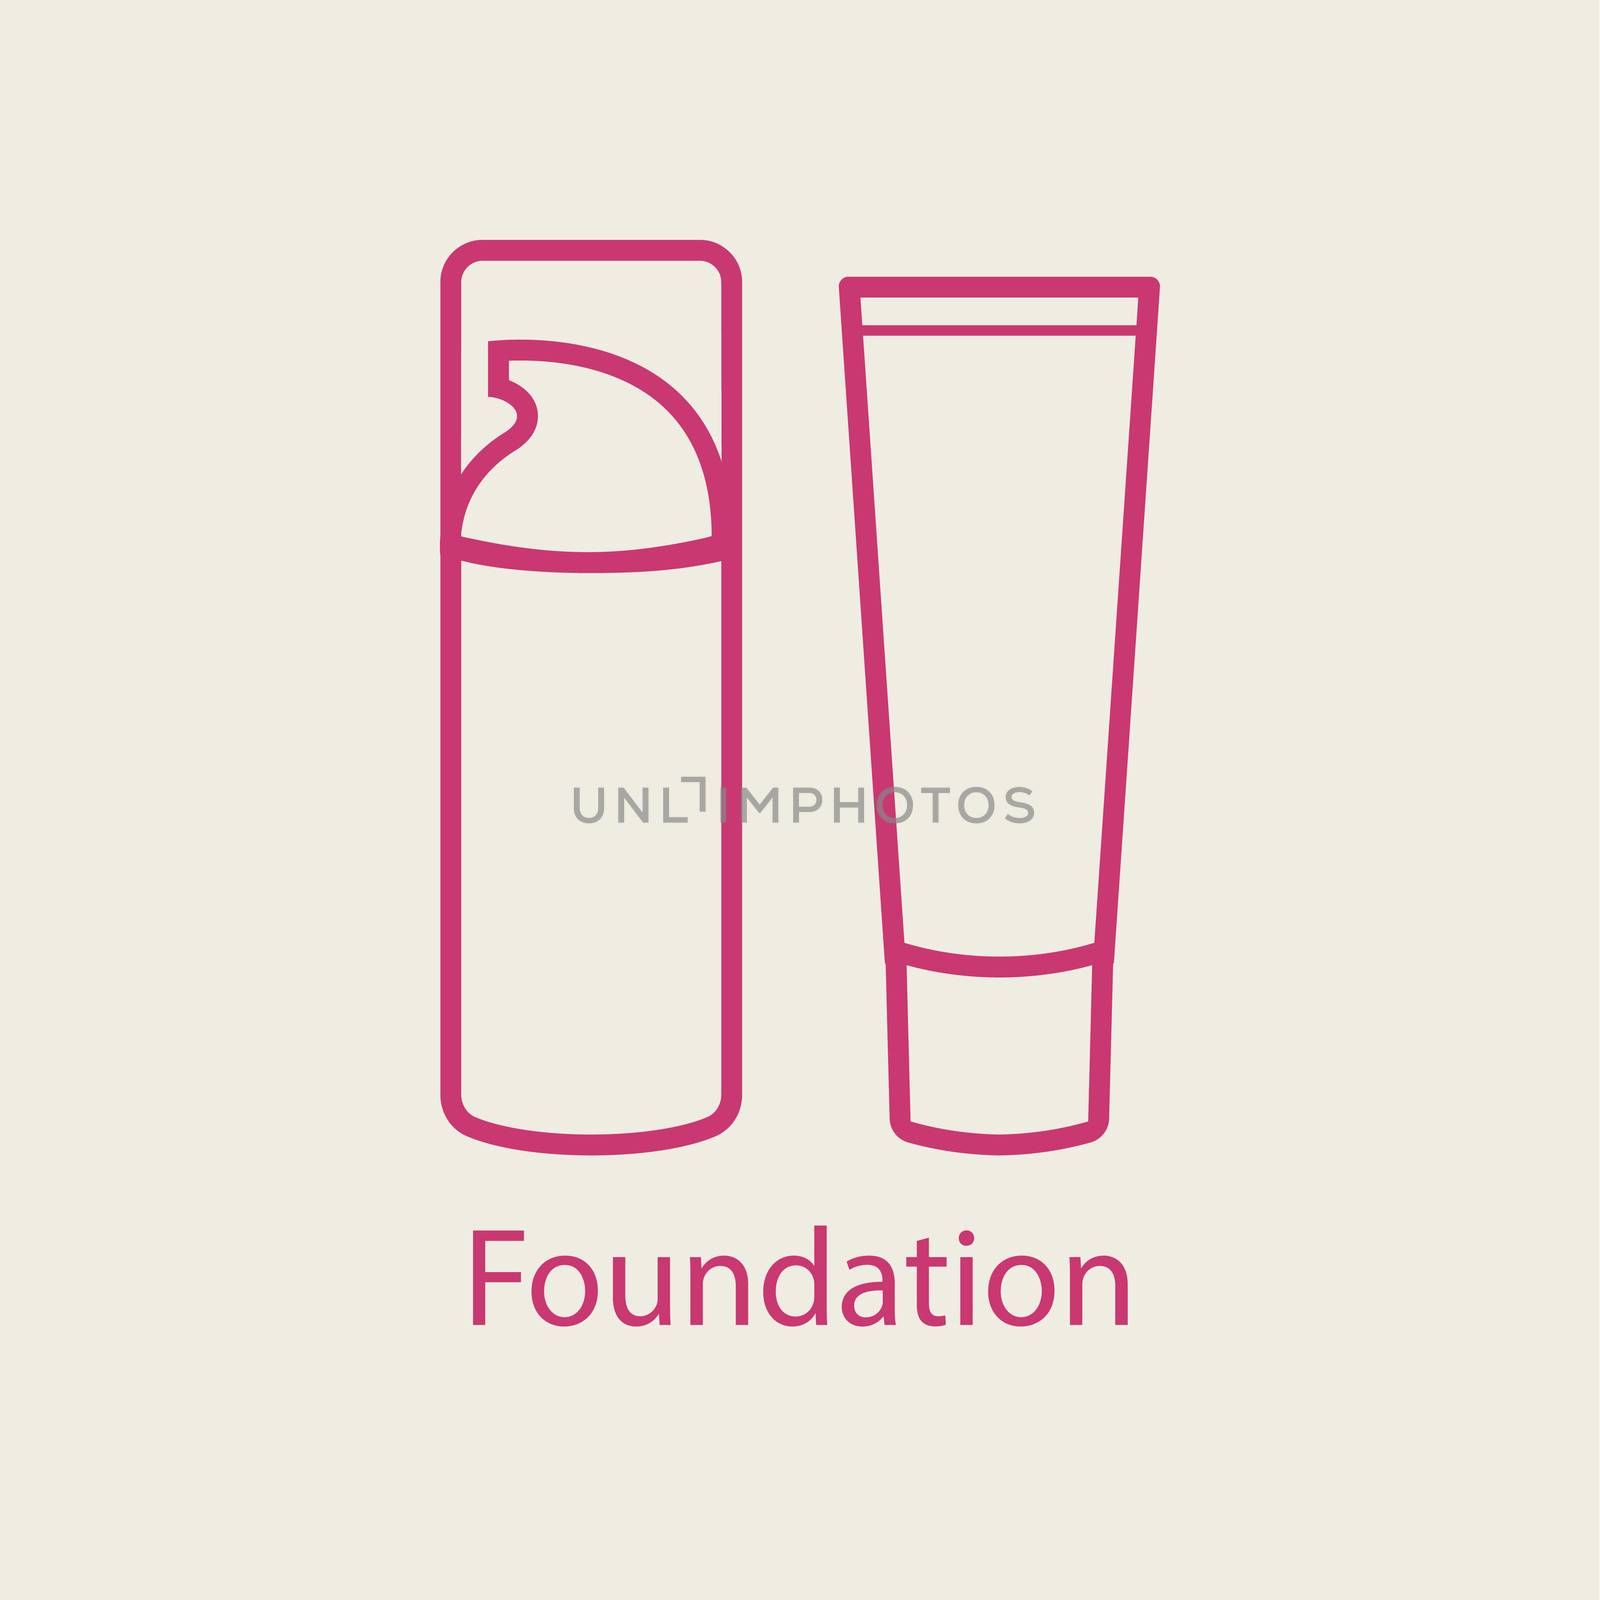 Foundation face cream line icon. Thin linear signs for makeup and visage. Cosmetic product of BB concealer cream bottle.